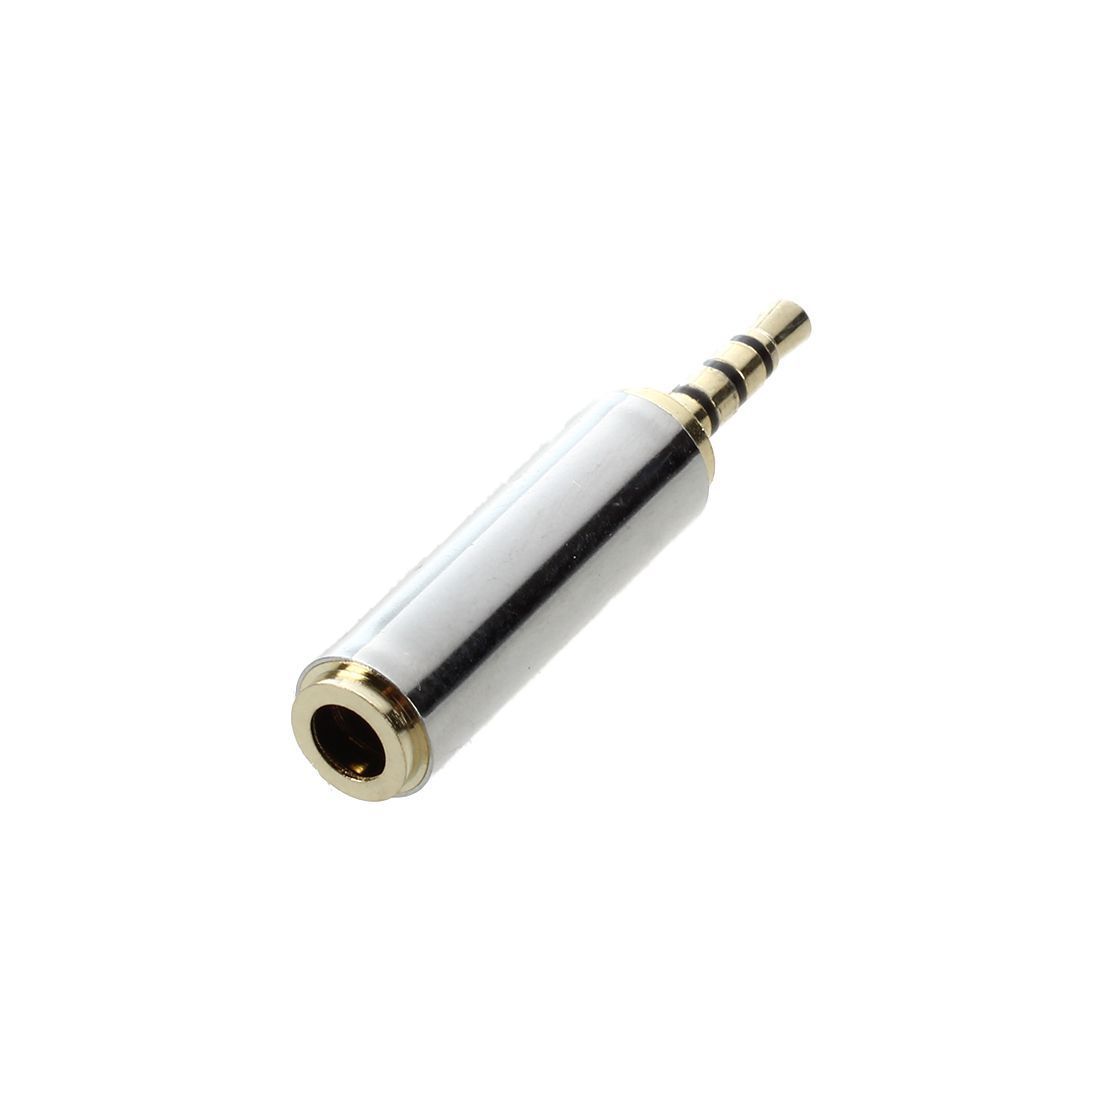 3.5mm female to 2.5mm male audio jack adapter